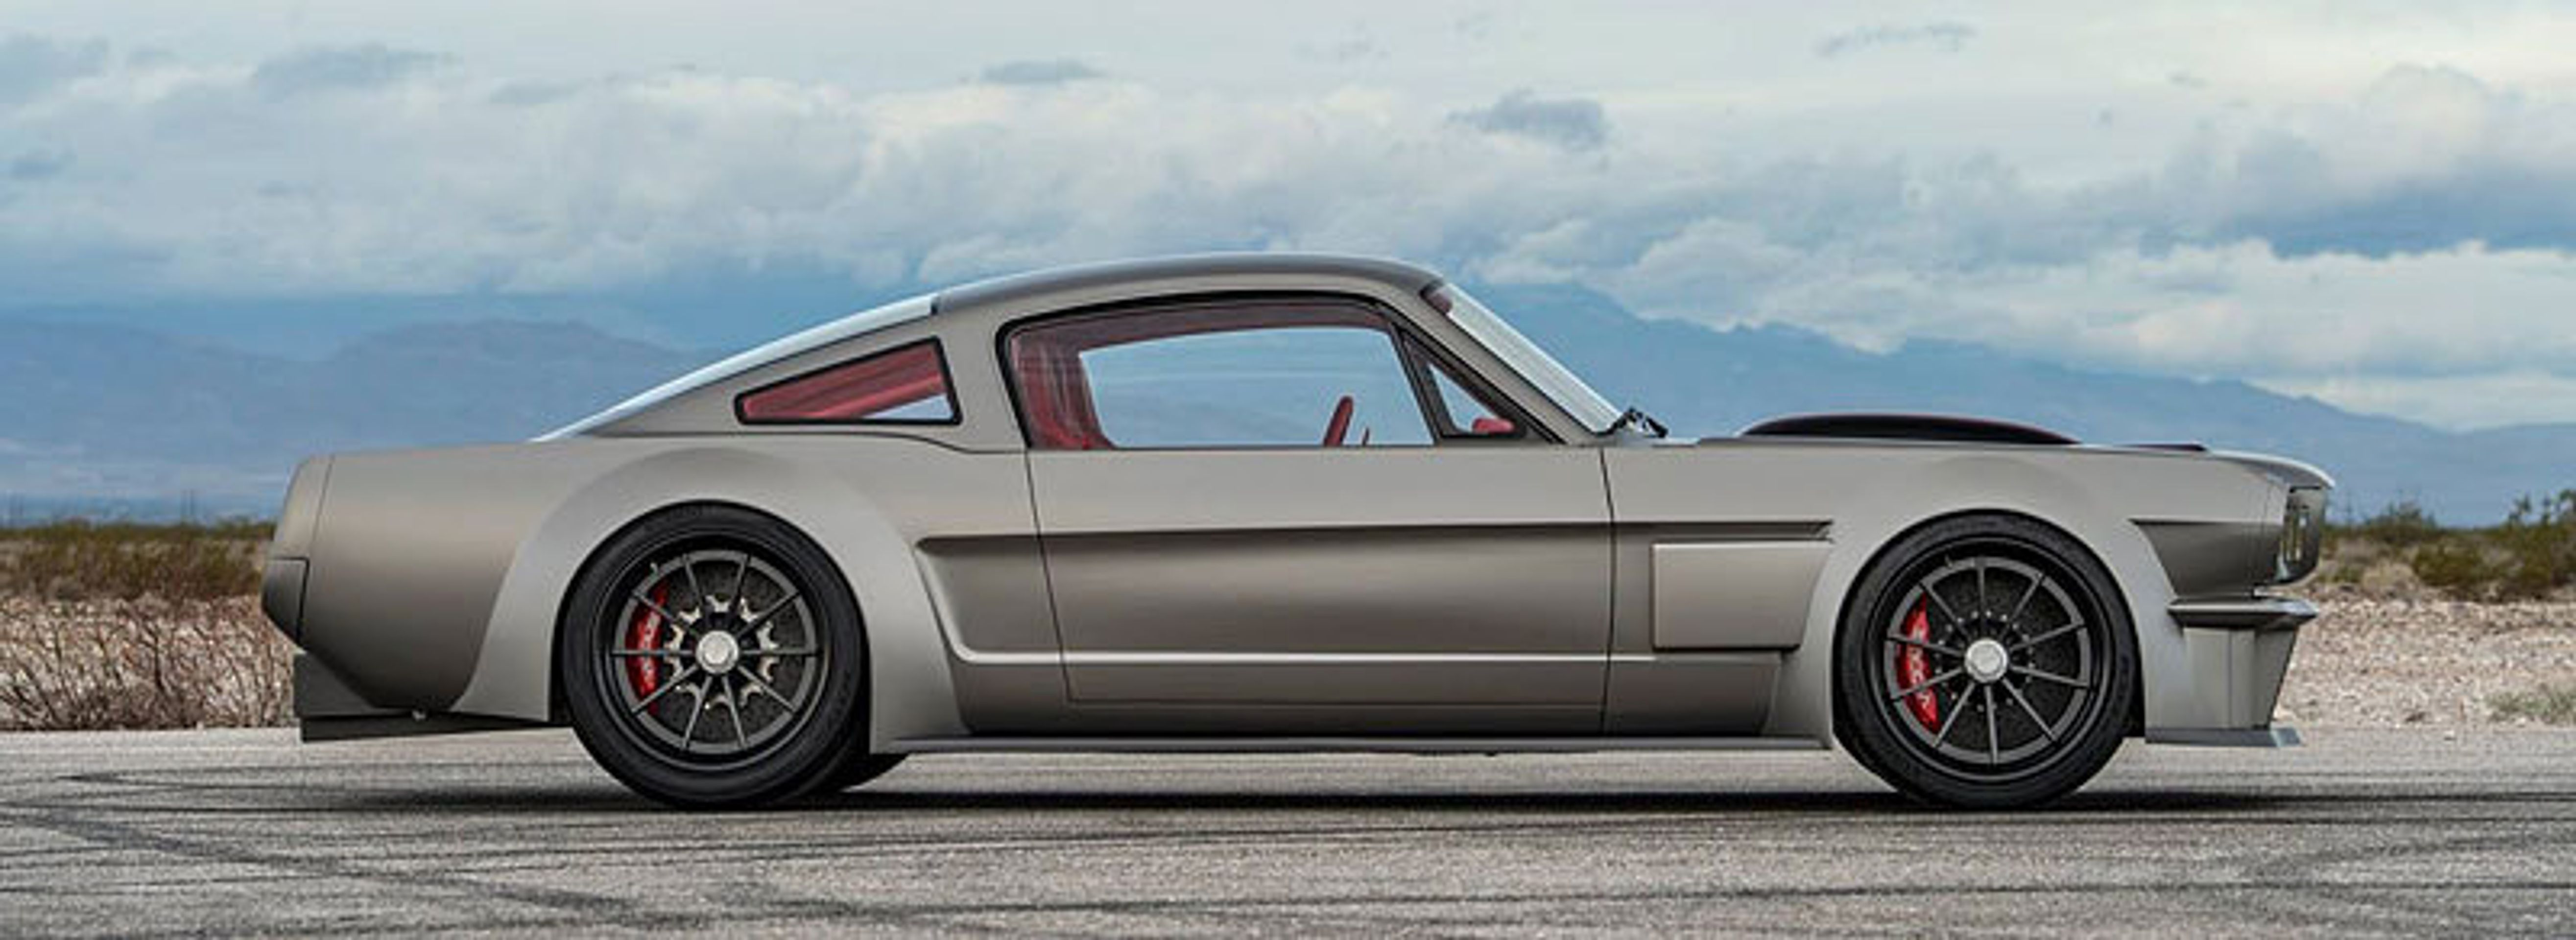 mustang - 50 - Galerie: Ford Mustang Vicious (23/32)